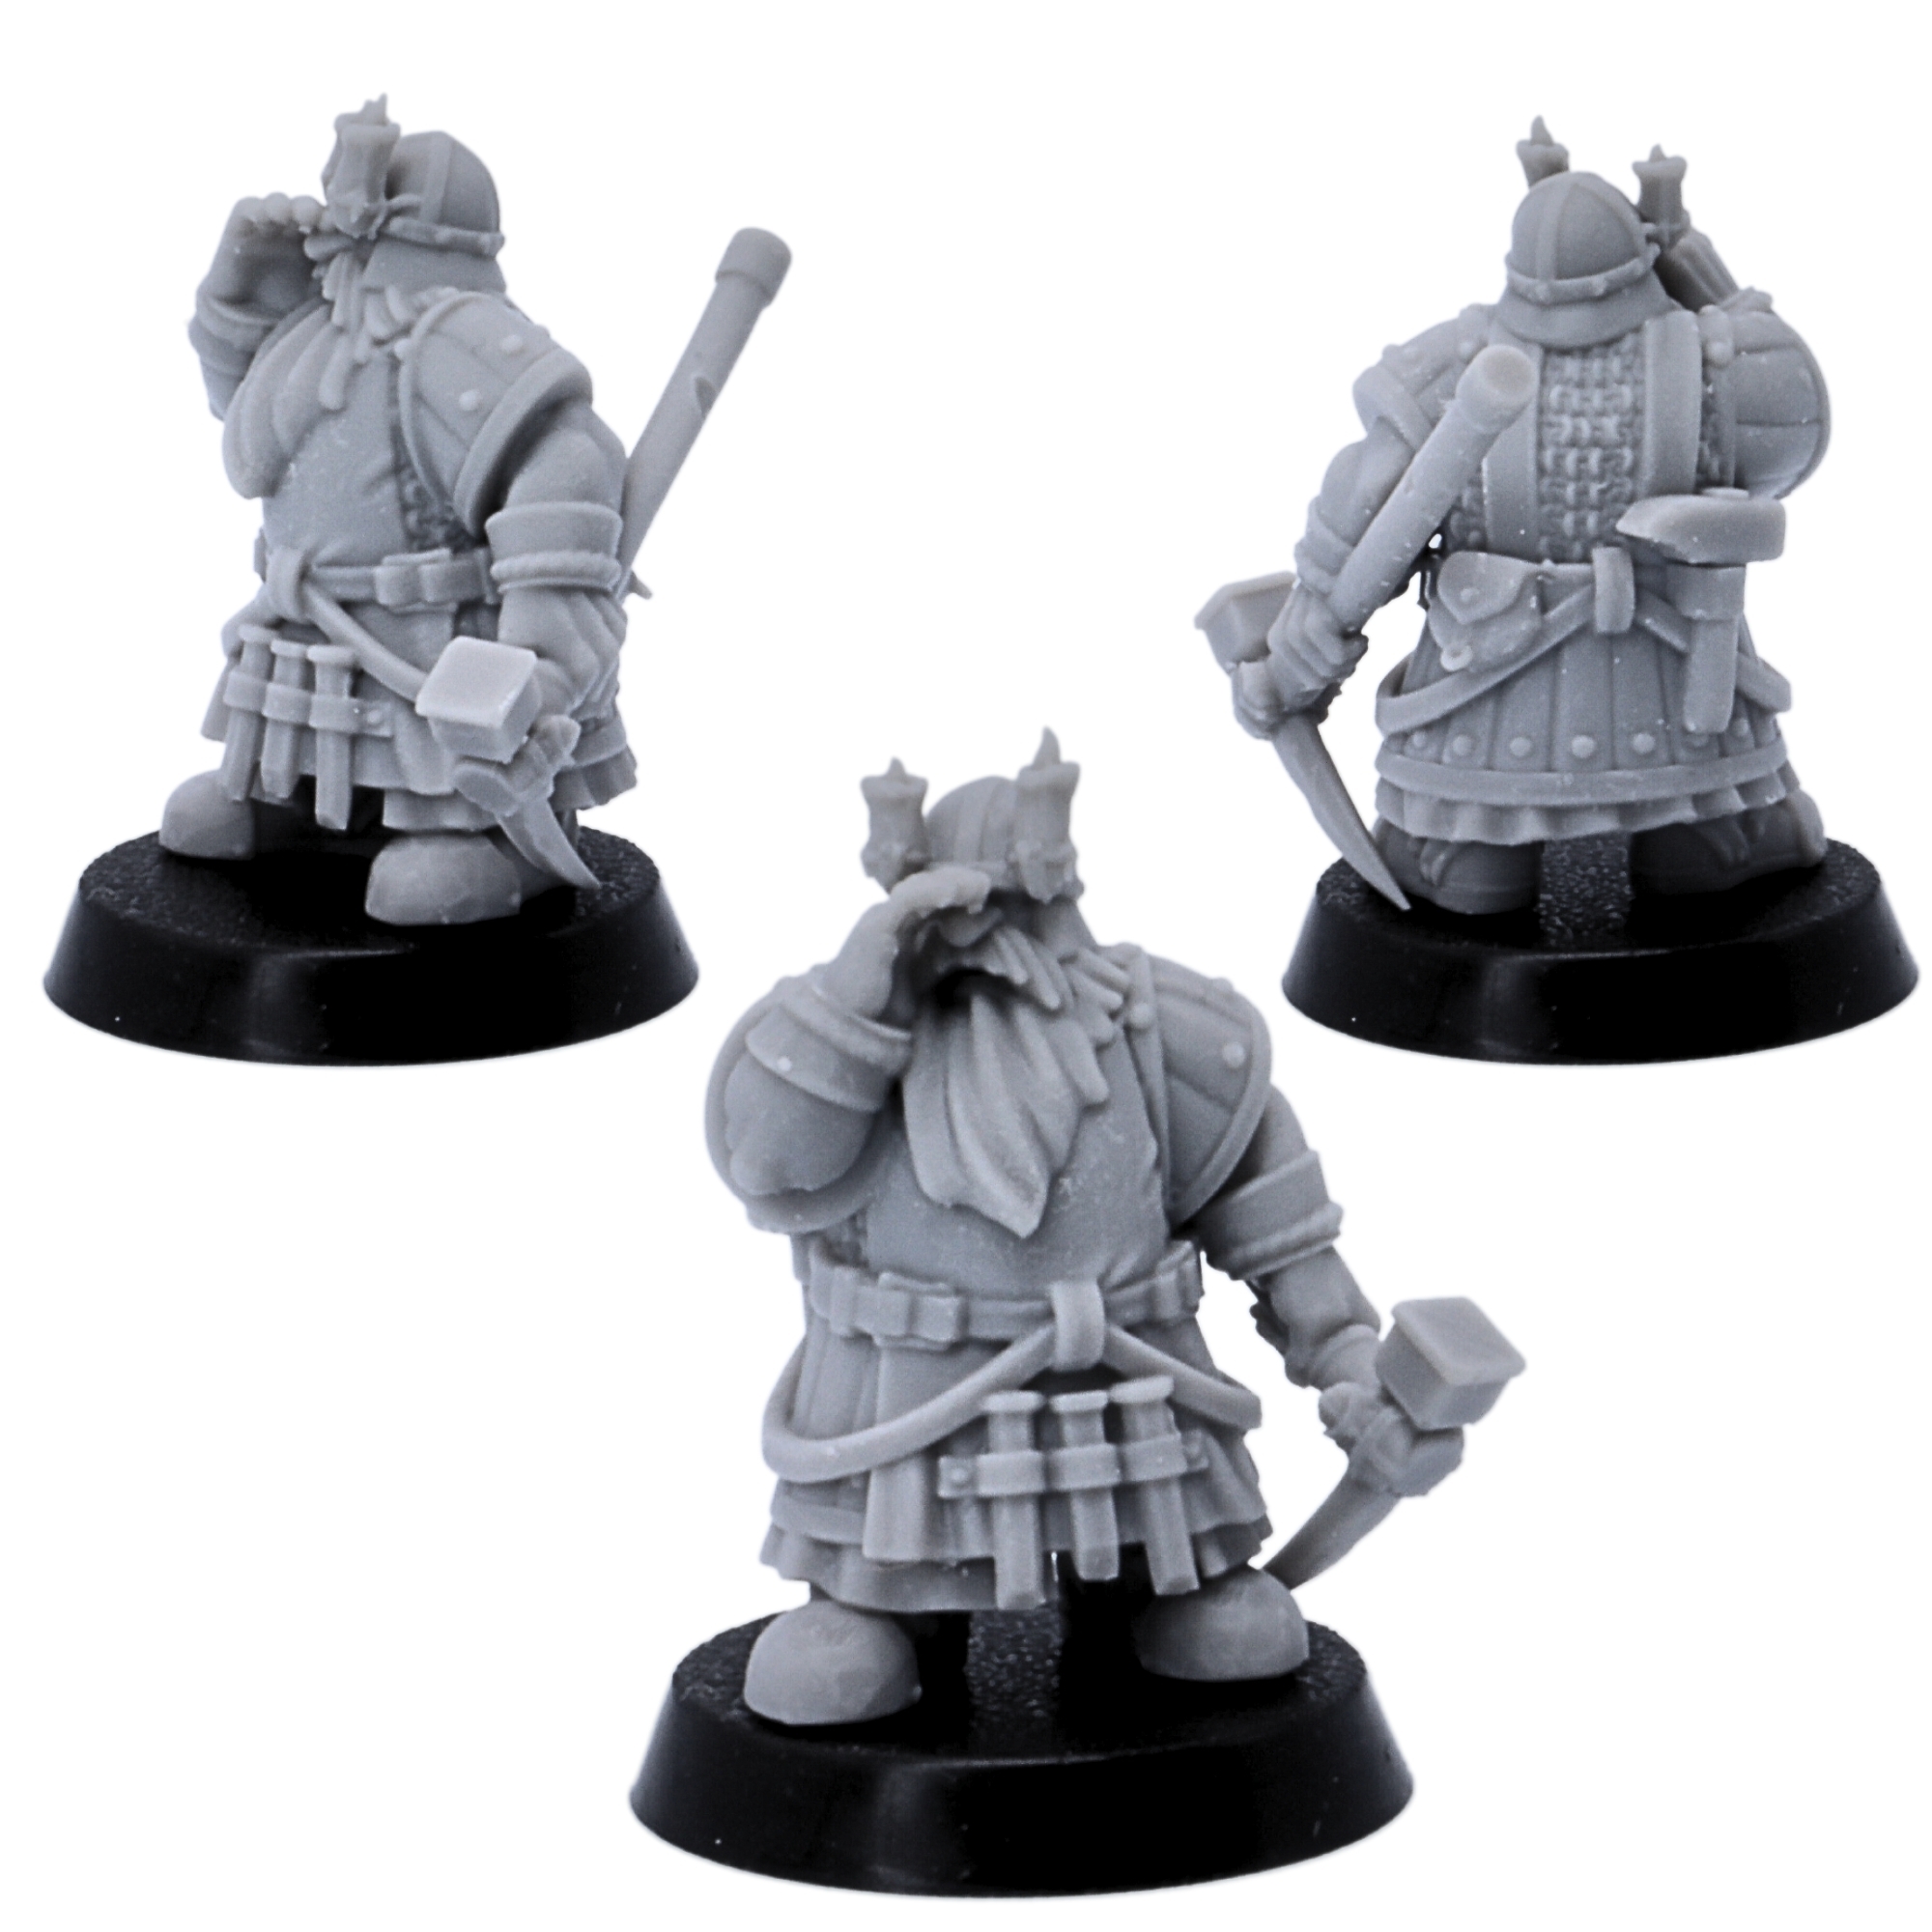 Dwarf Miners Collectible Figures